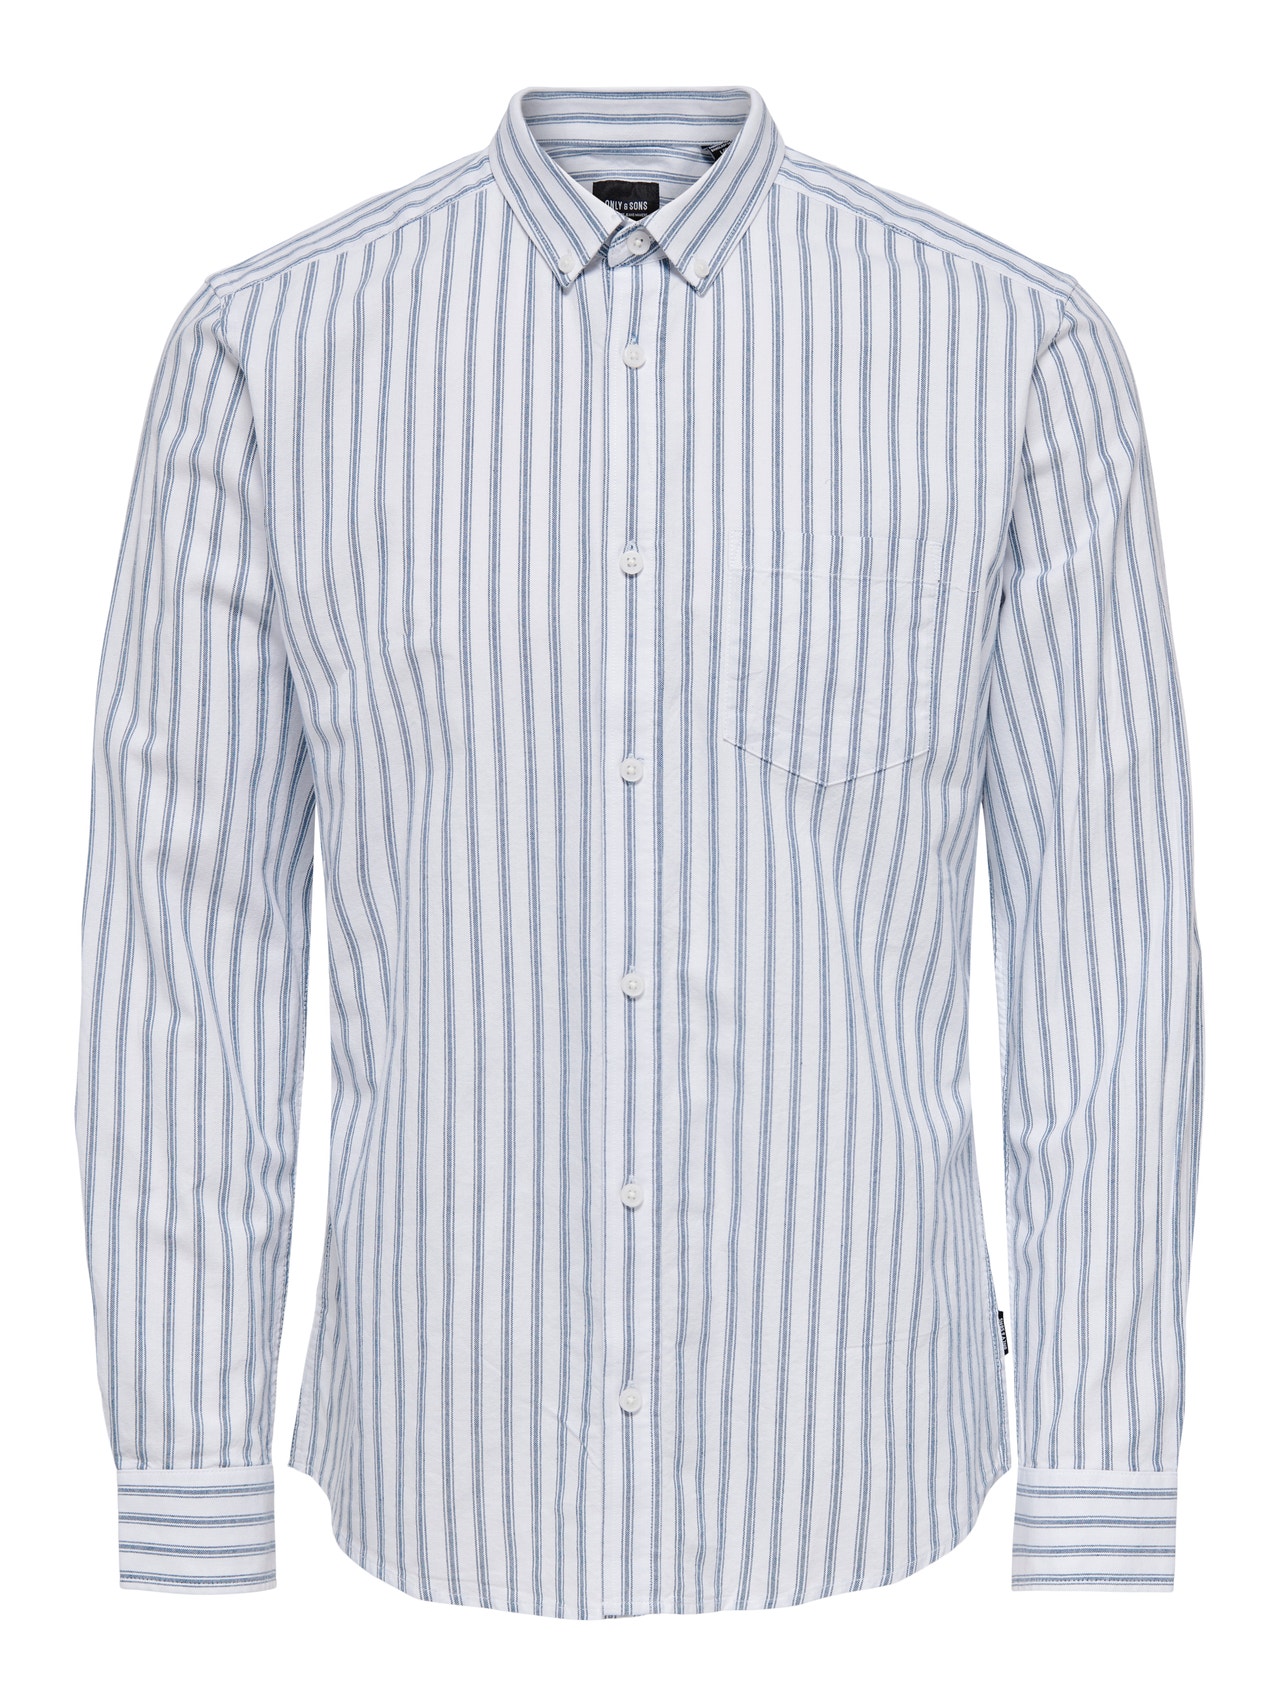 ONLY & SONS Slim Fit Striped shirt -Dress Blues - 22023977